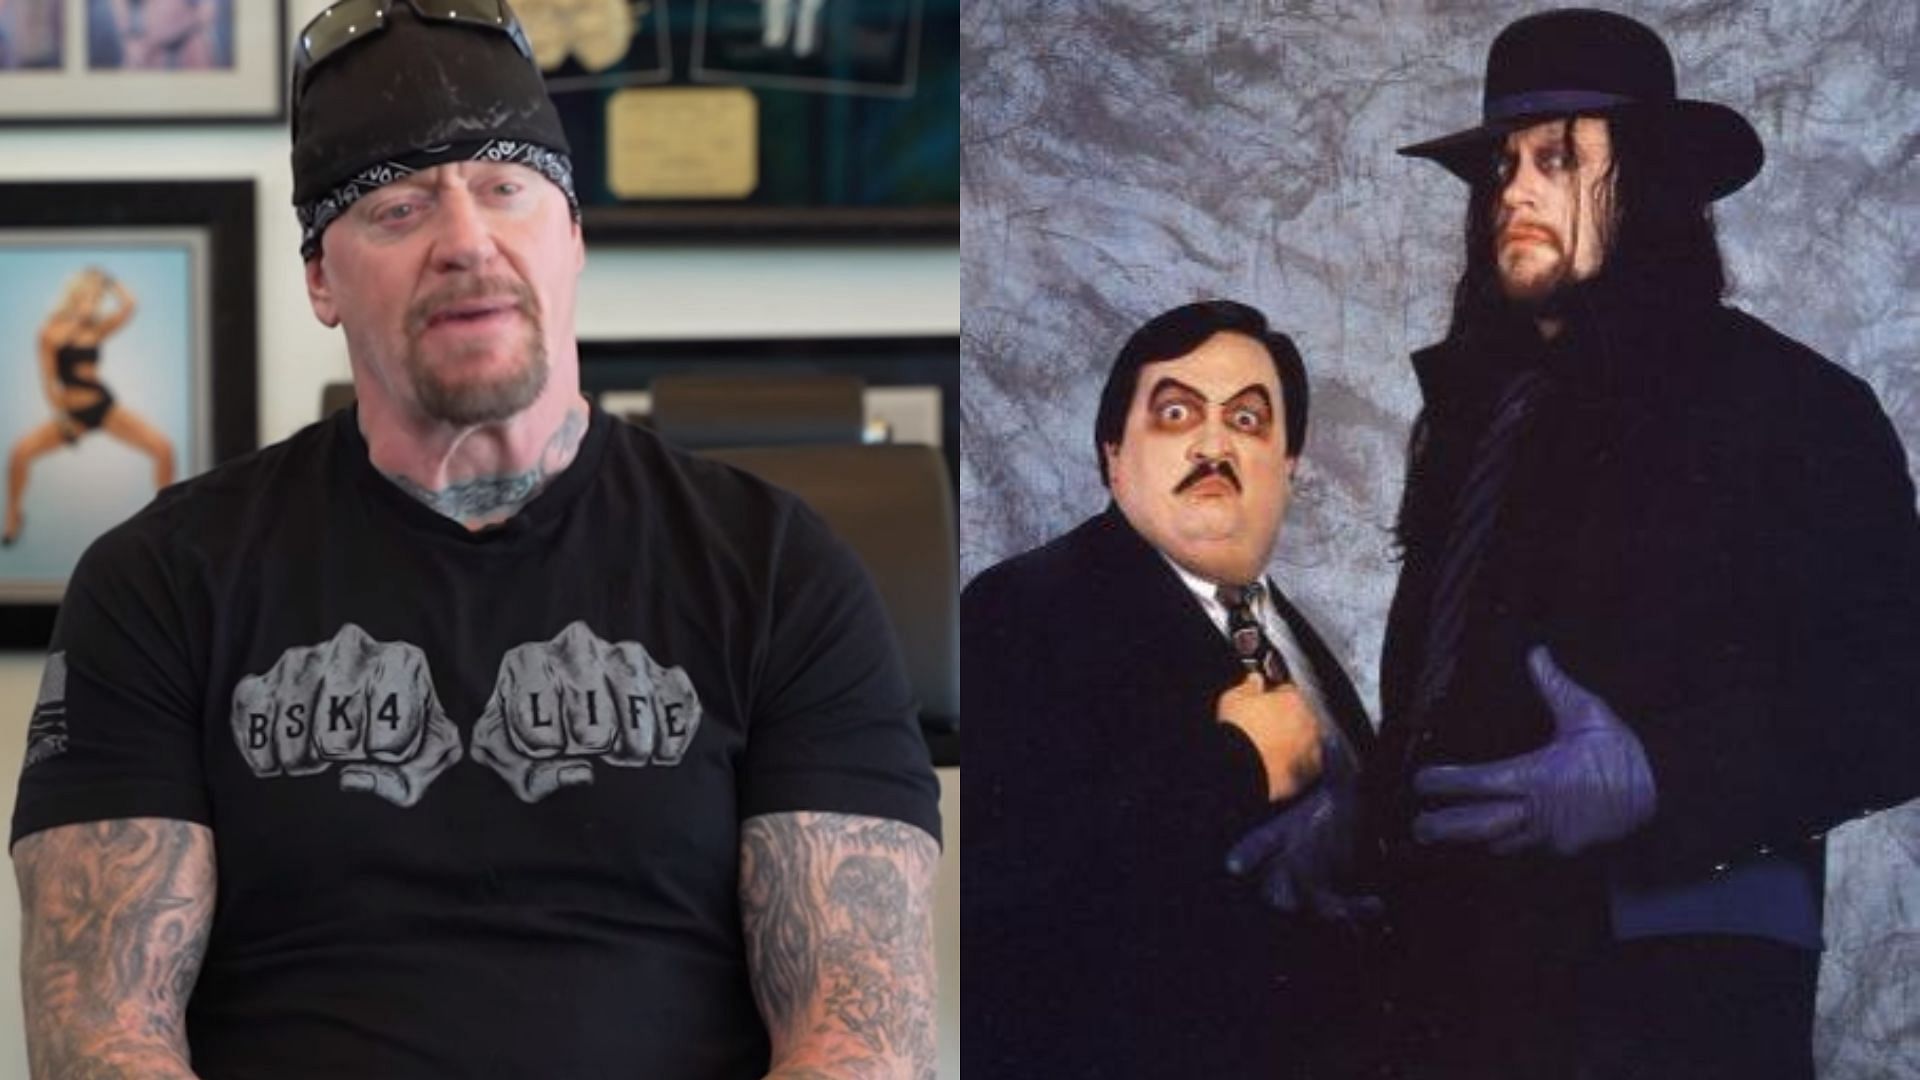 The Undertaker and Paul Bearer was a great pairing.